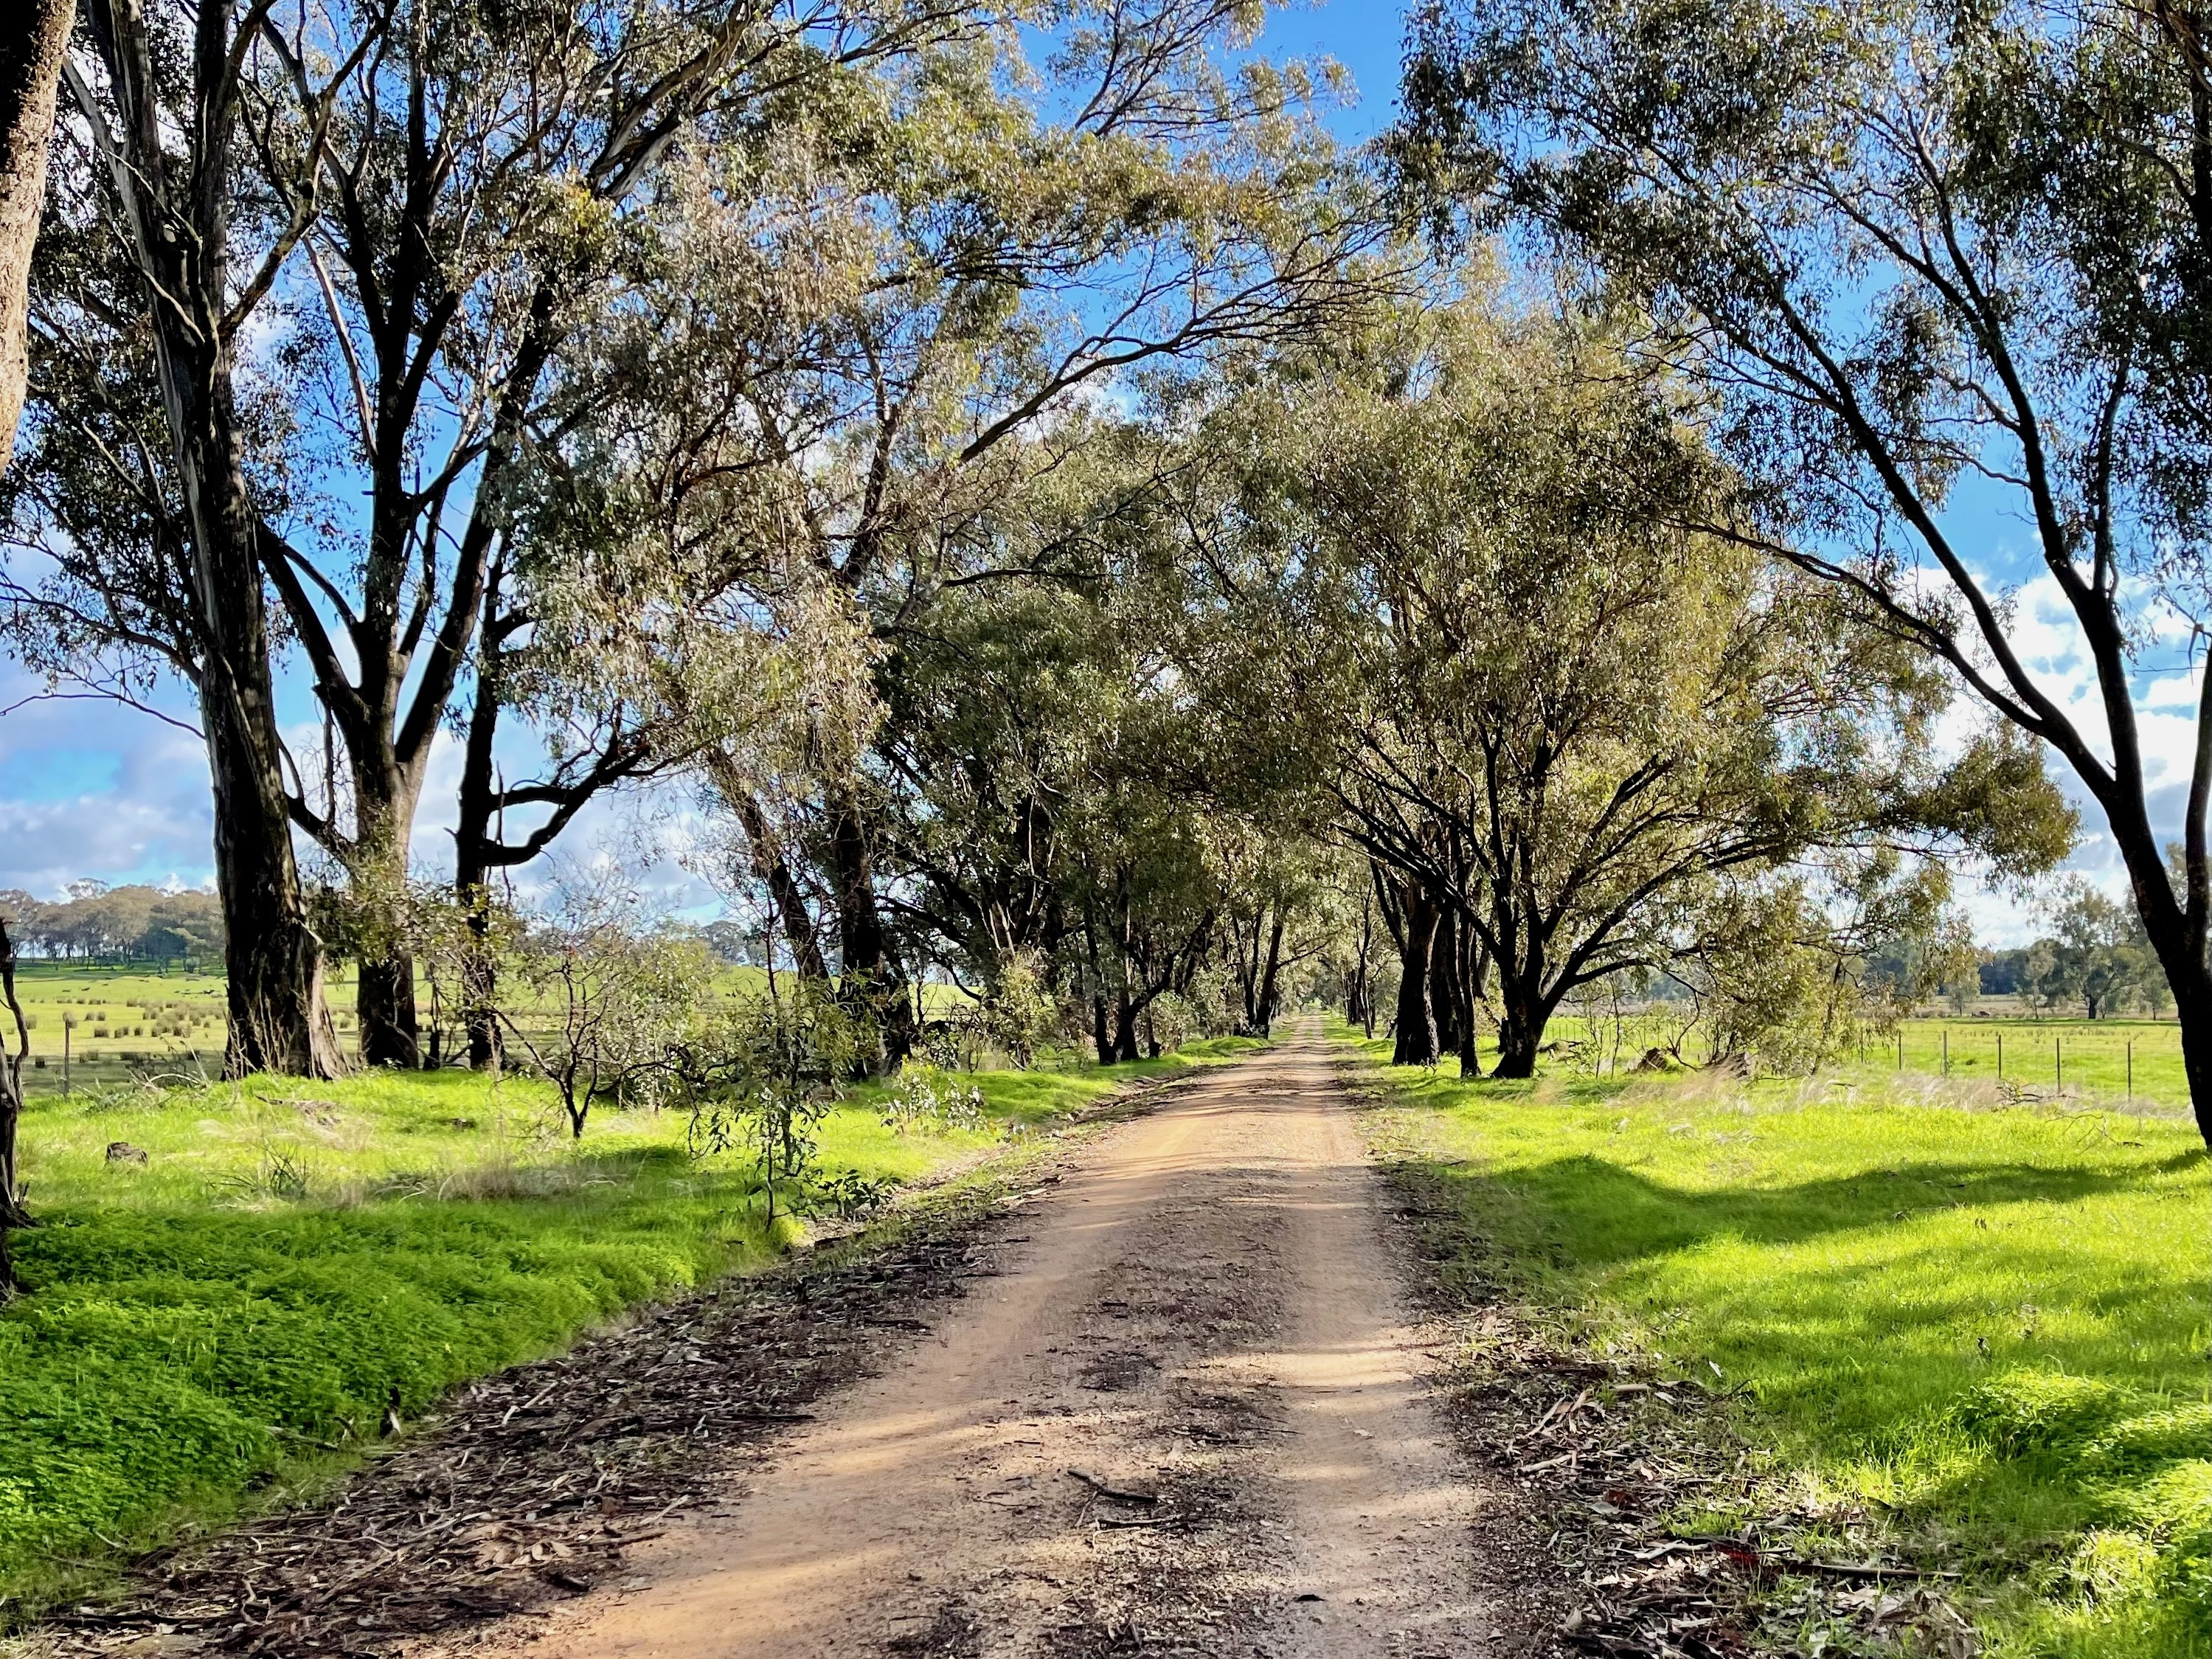 A native tree lined smooth gravel road running through open farmland on a sunny day